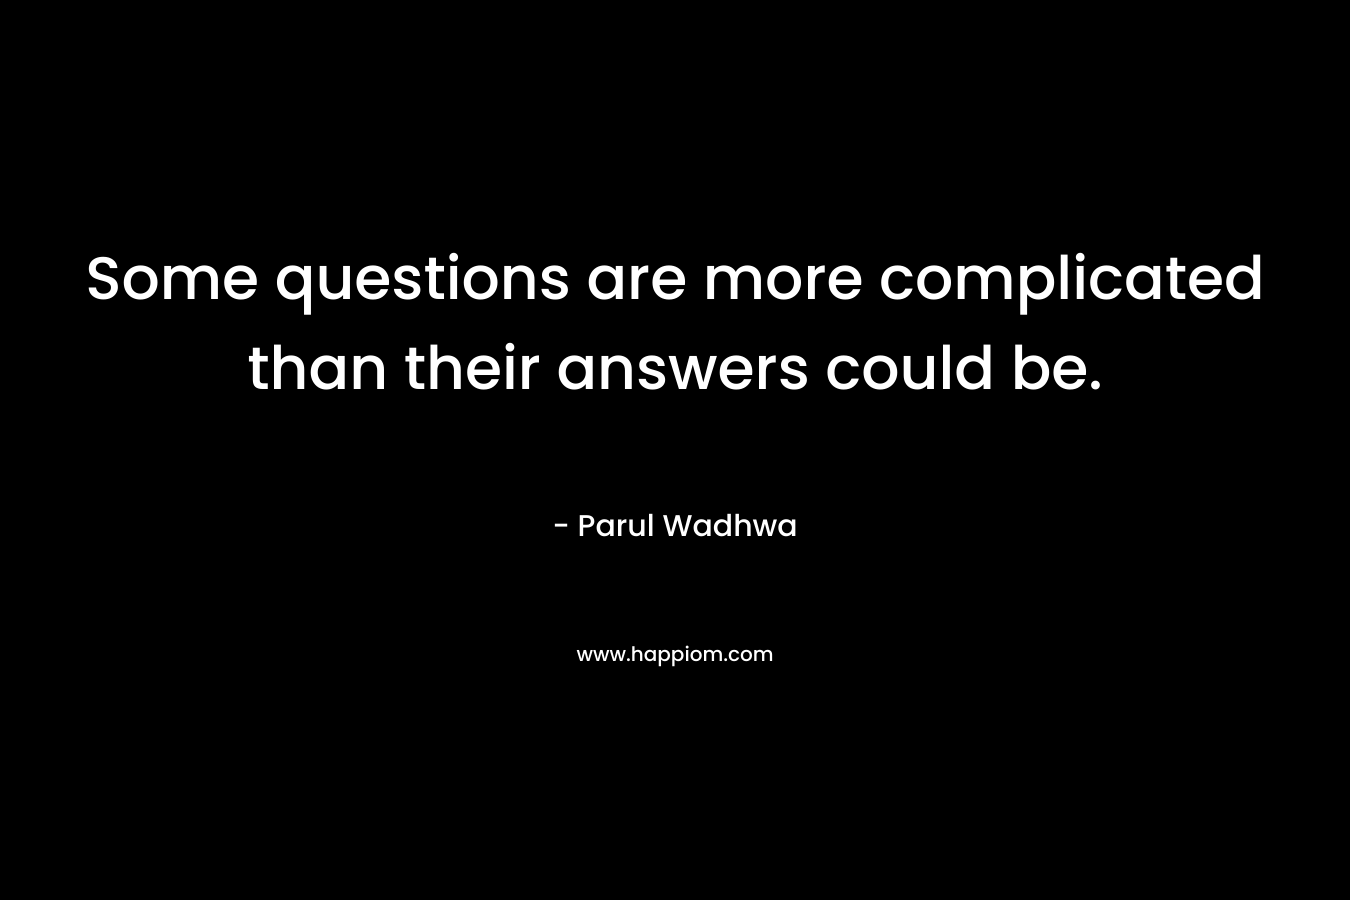 Some questions are more complicated than their answers could be.